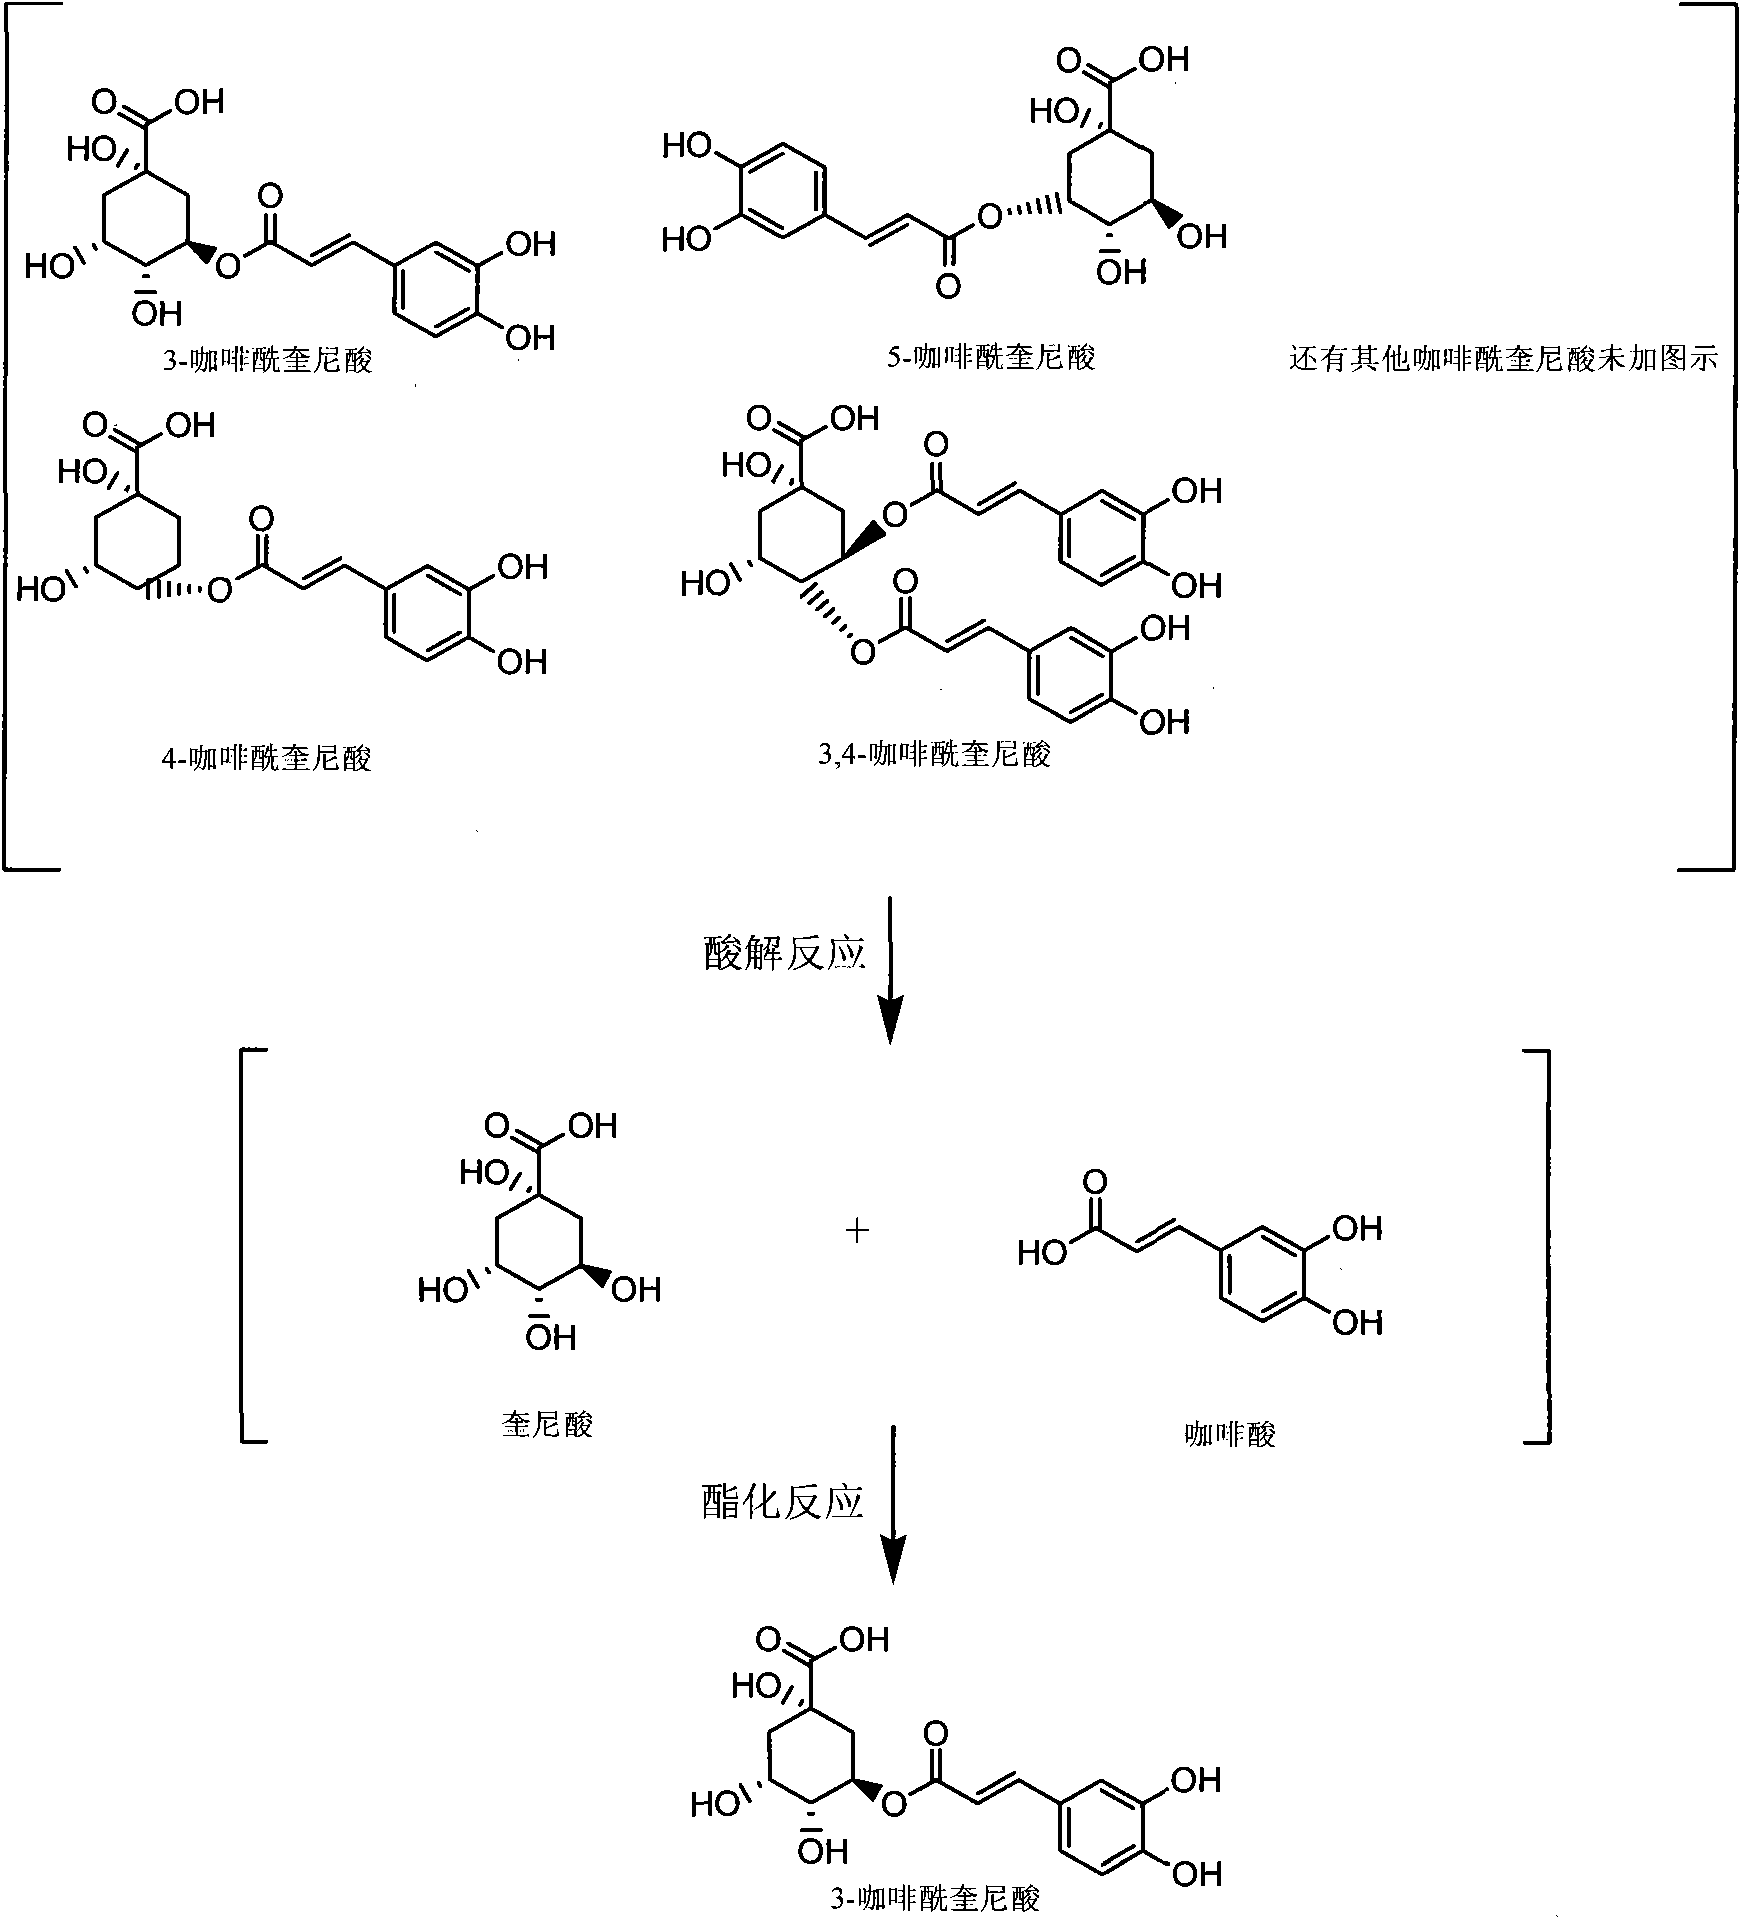 Method for preparing and partially-synthesizing chlorogenic acid from processing residual liquid of aqua lonicerae foliae